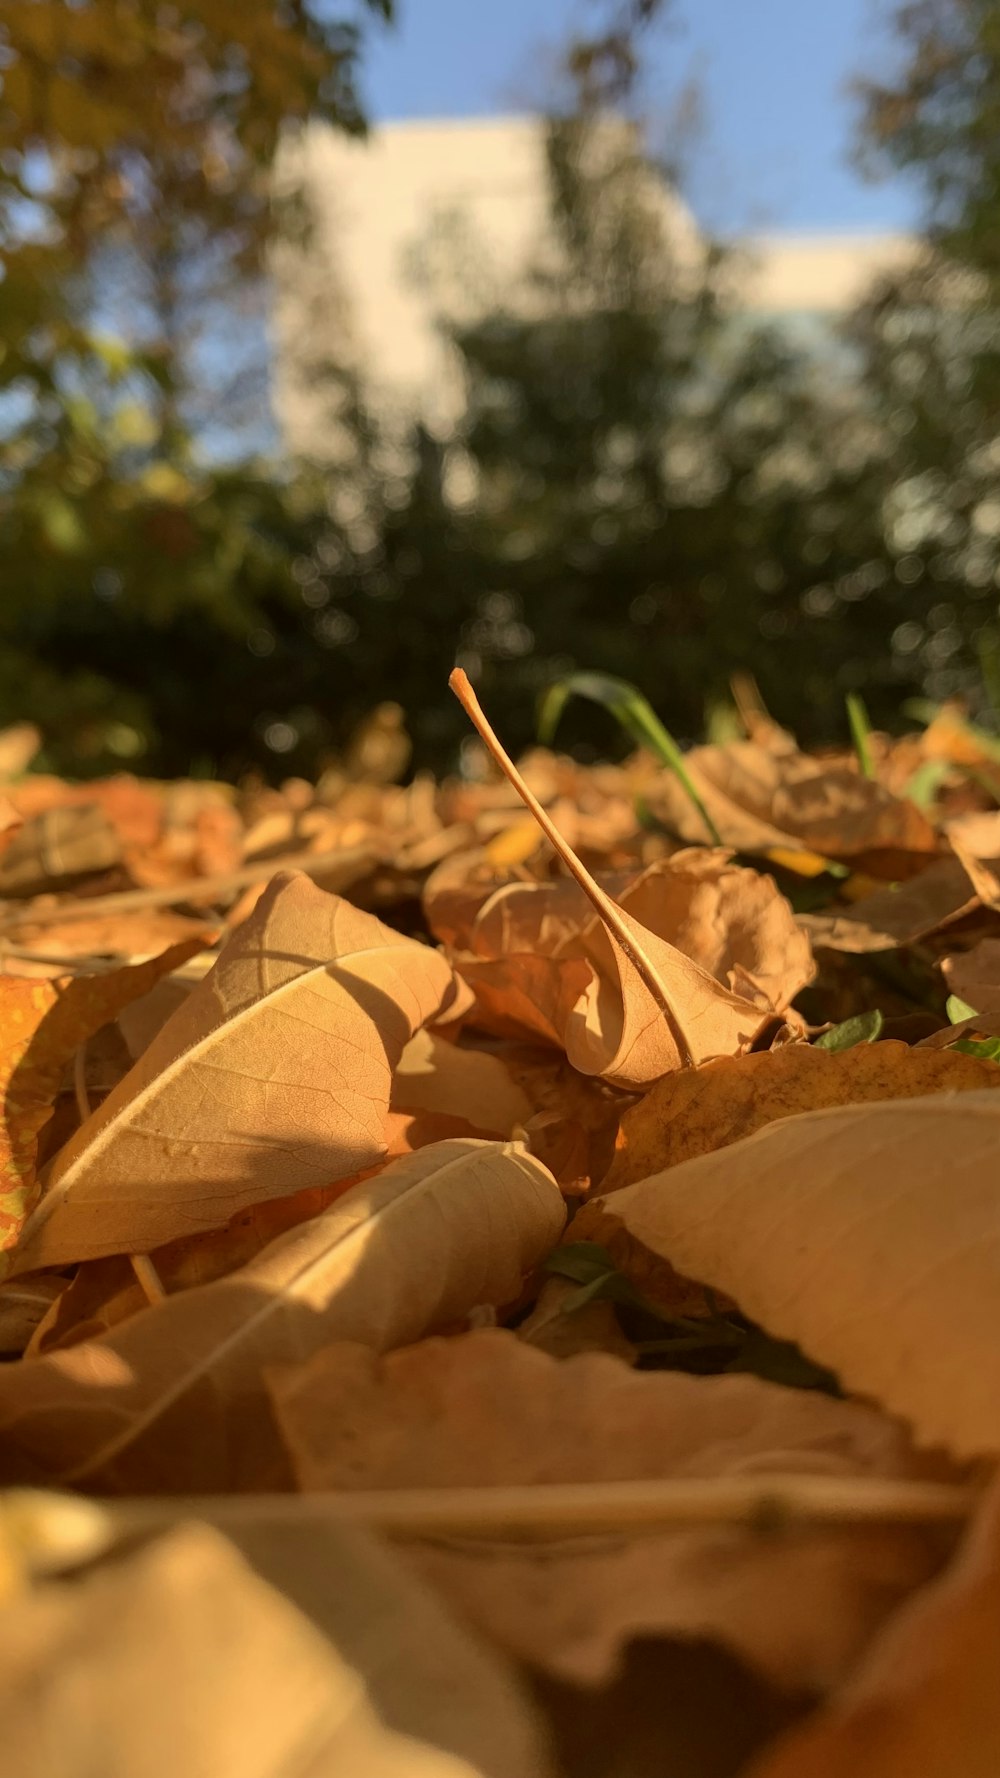 a close up of leaves on the ground with trees in the background